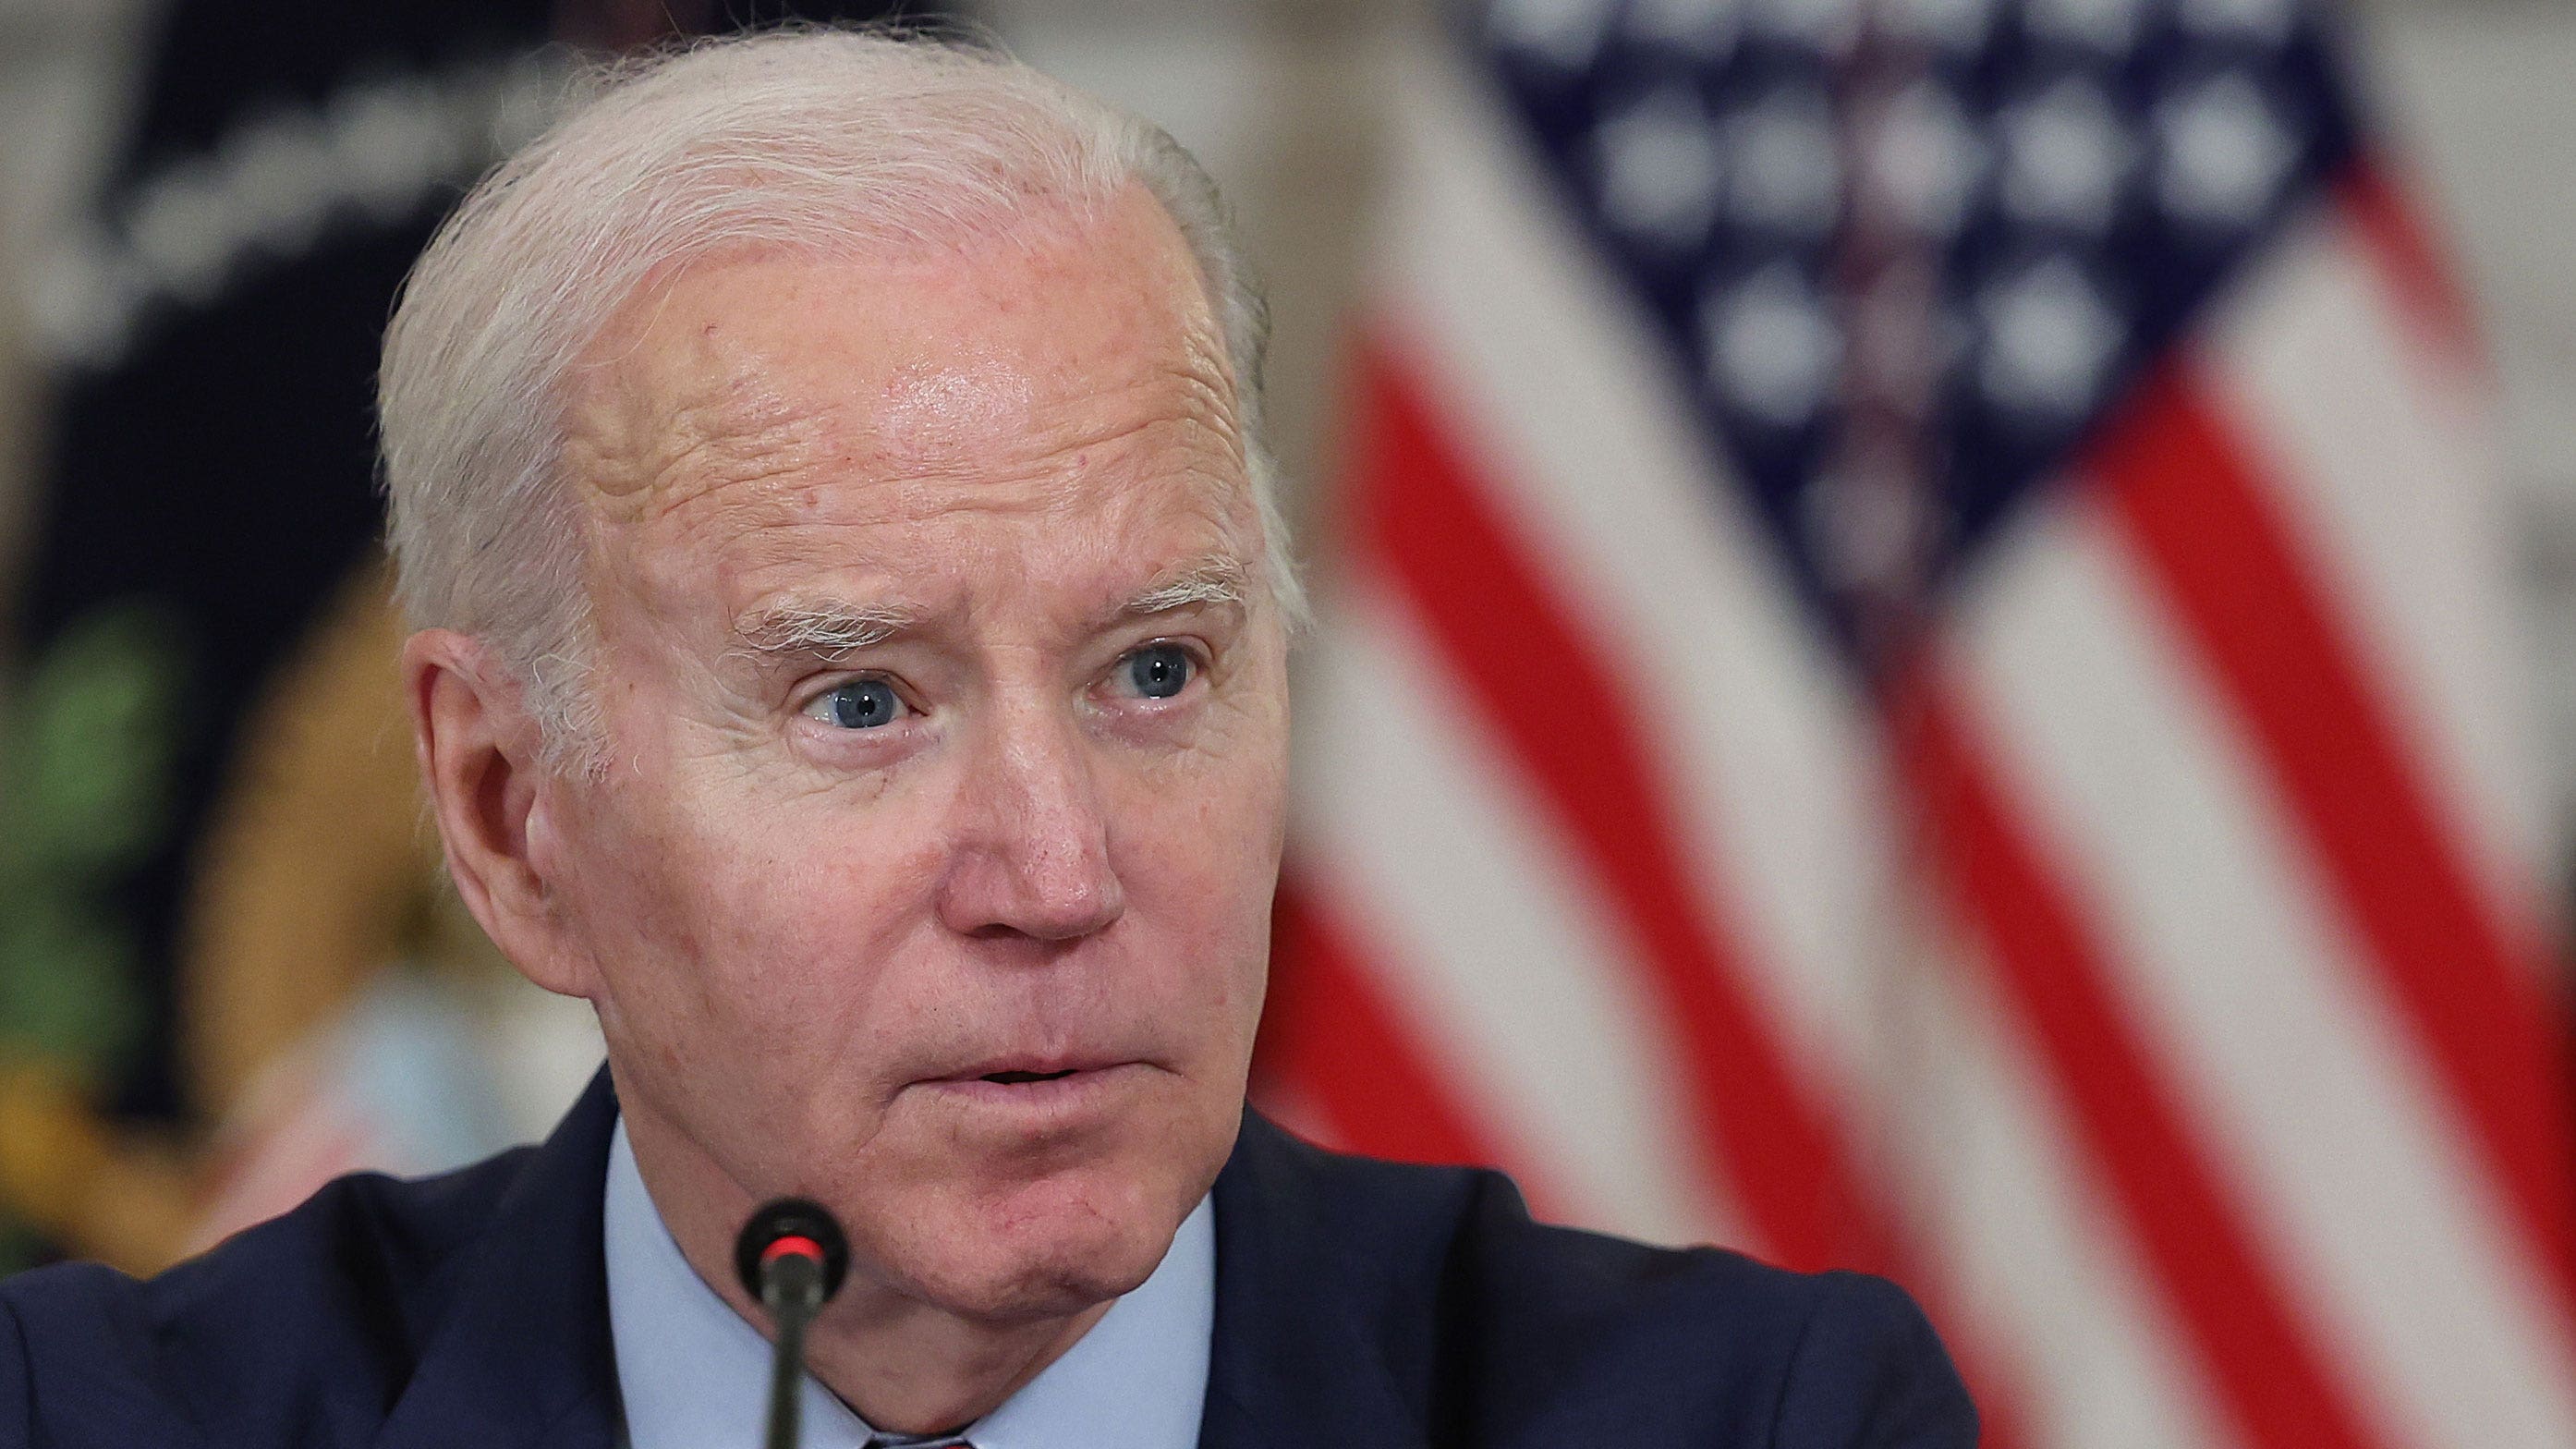 Biden blasted for barking at reporter to ‘shush up’ during Japan G7 summit meeting: ‘If Trump does that…’